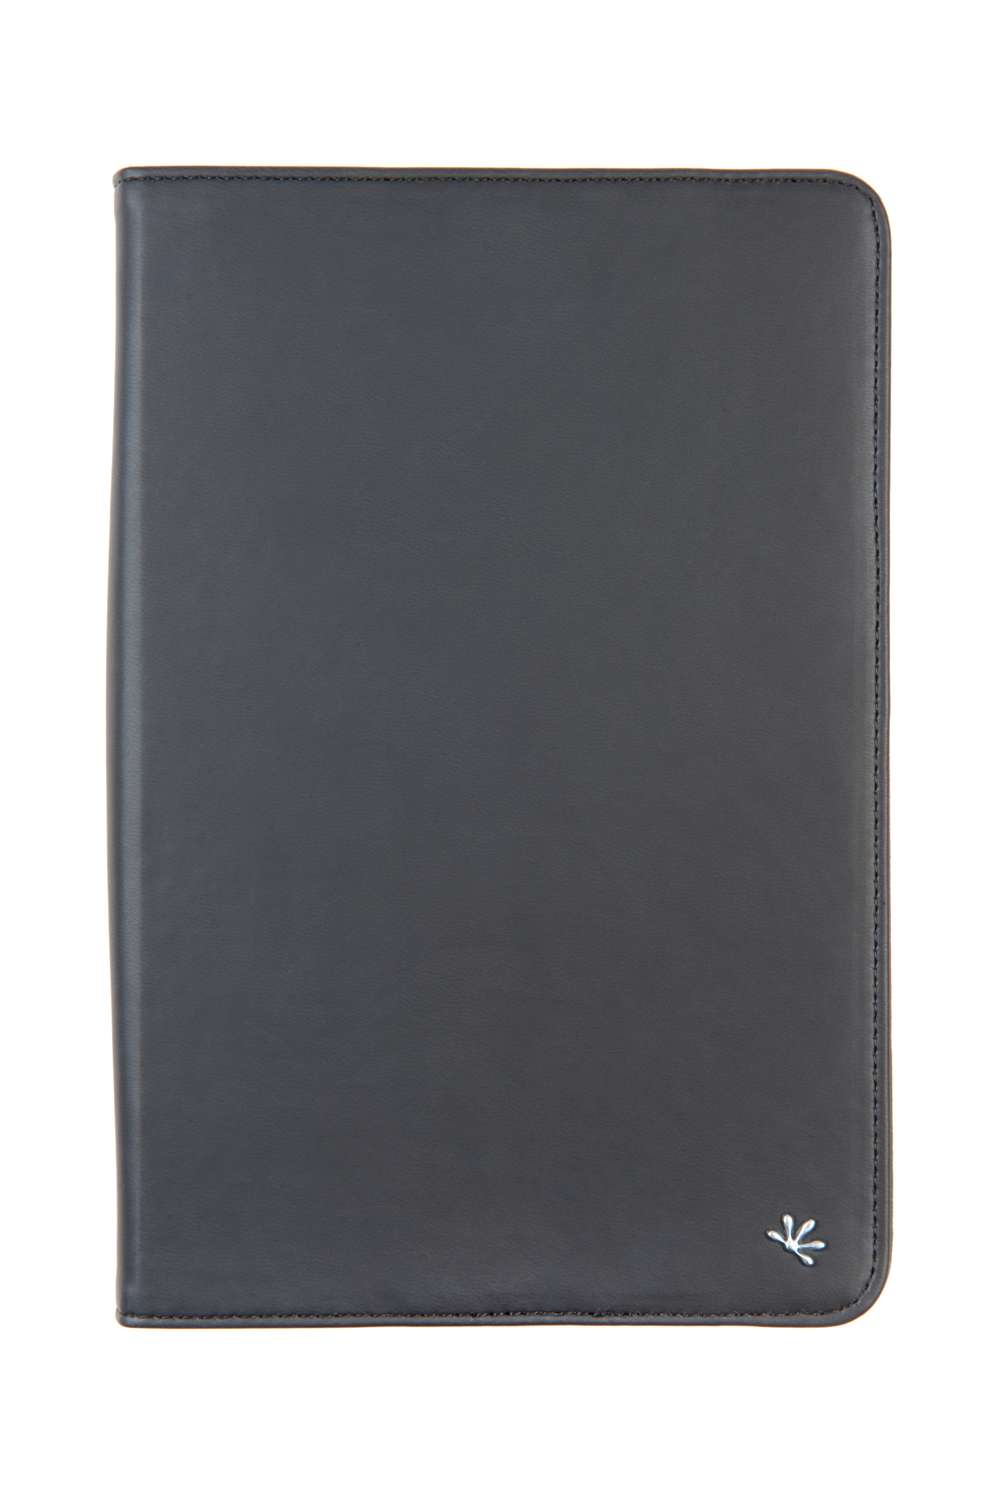 Universal e-reader/tablet case - 7 & 8 inch devices